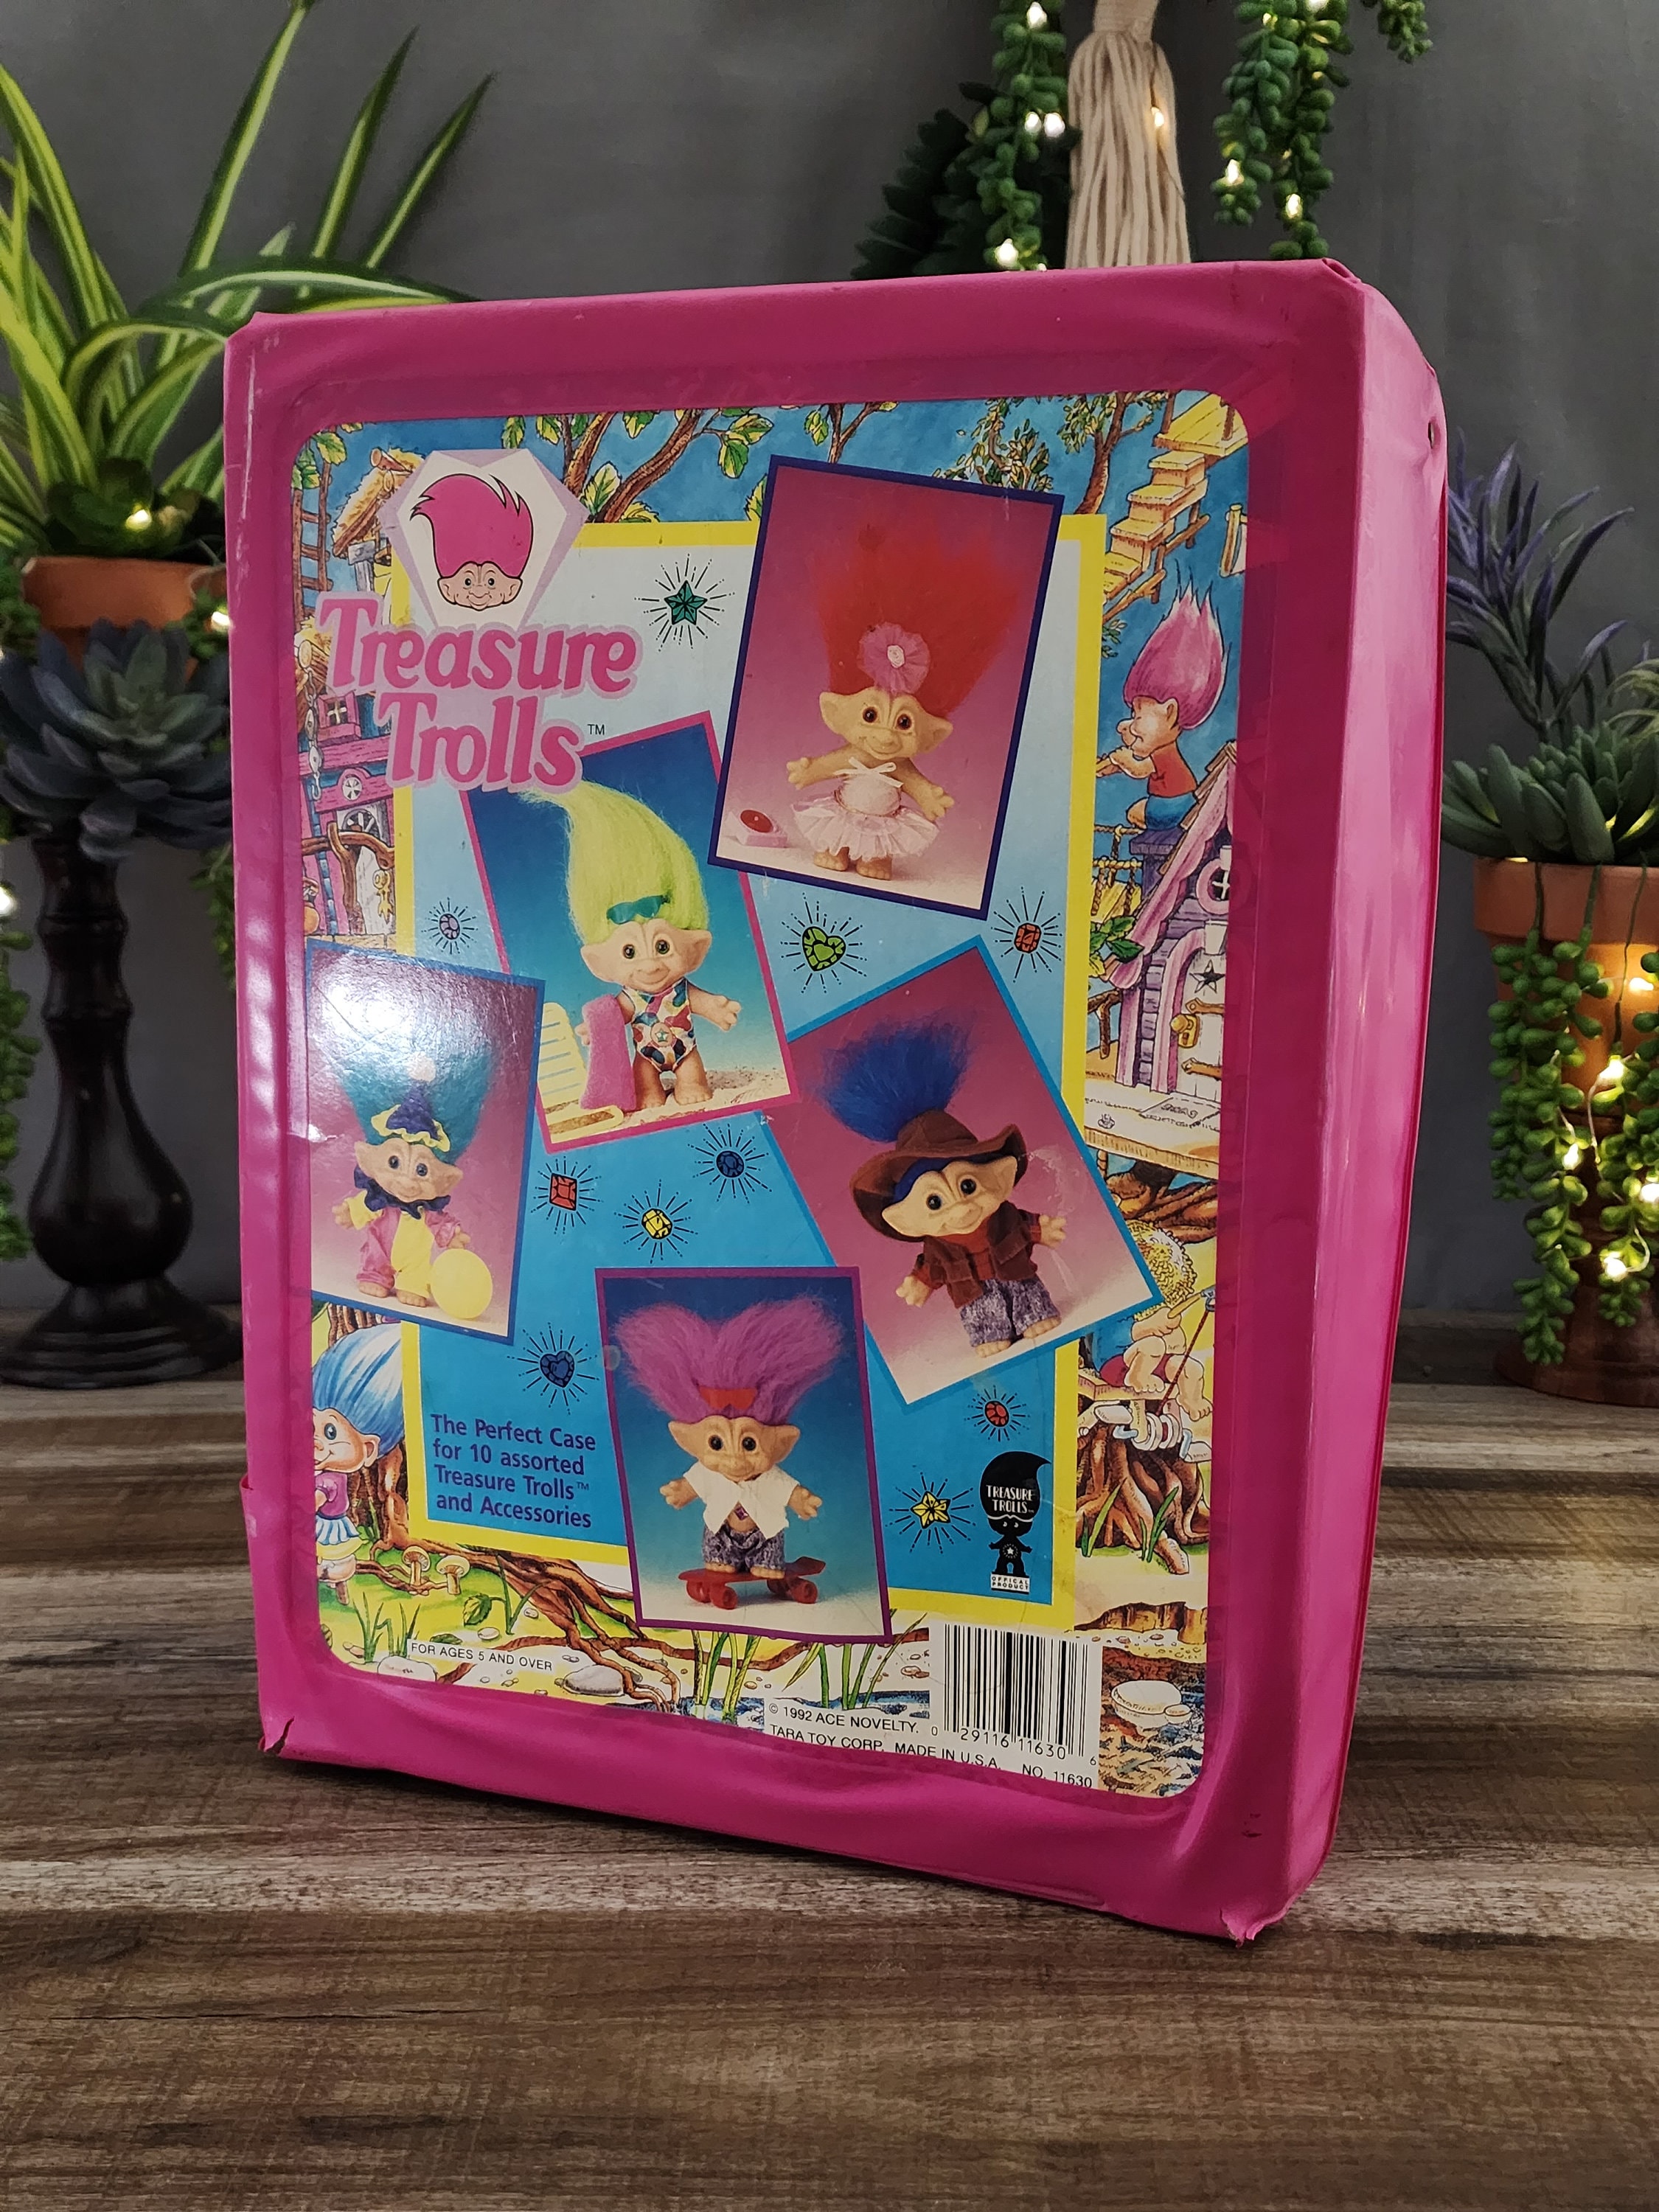 Treasure Trolls carrying case, pink, 1992 by Ace Novelty